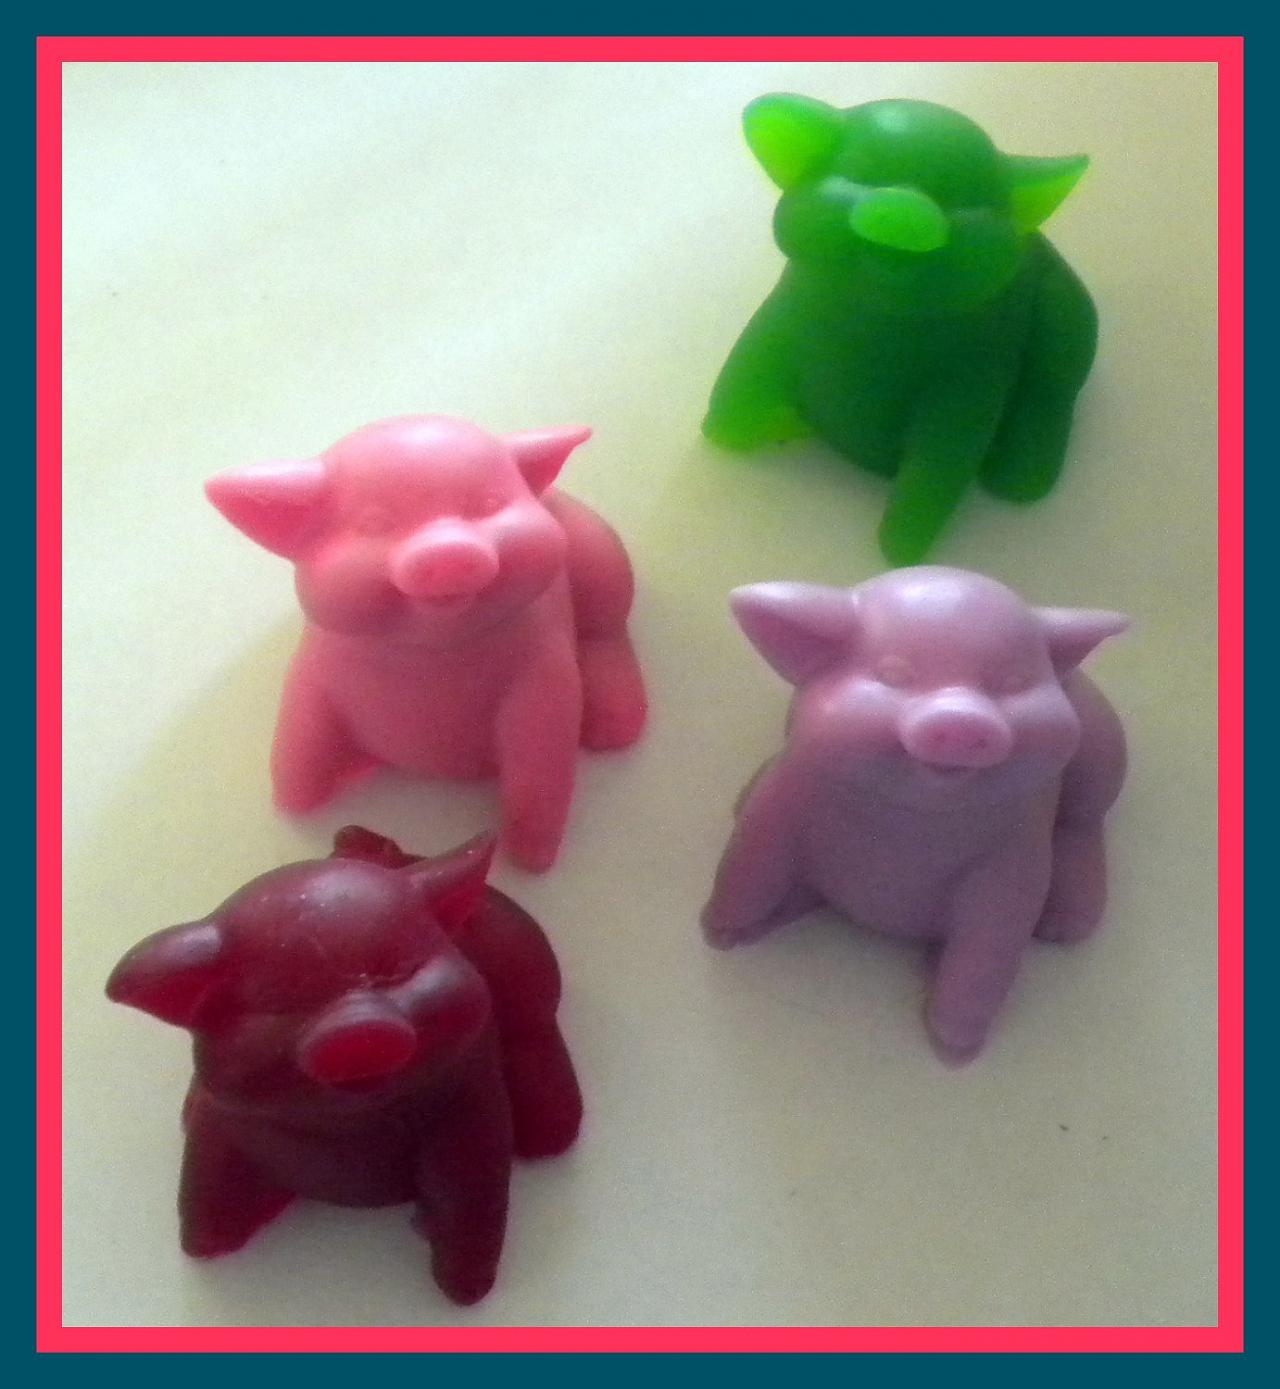 Soap - Pig Soap - Pig - Animal Soap - Your Choice Of Scent And Color - Party Favors